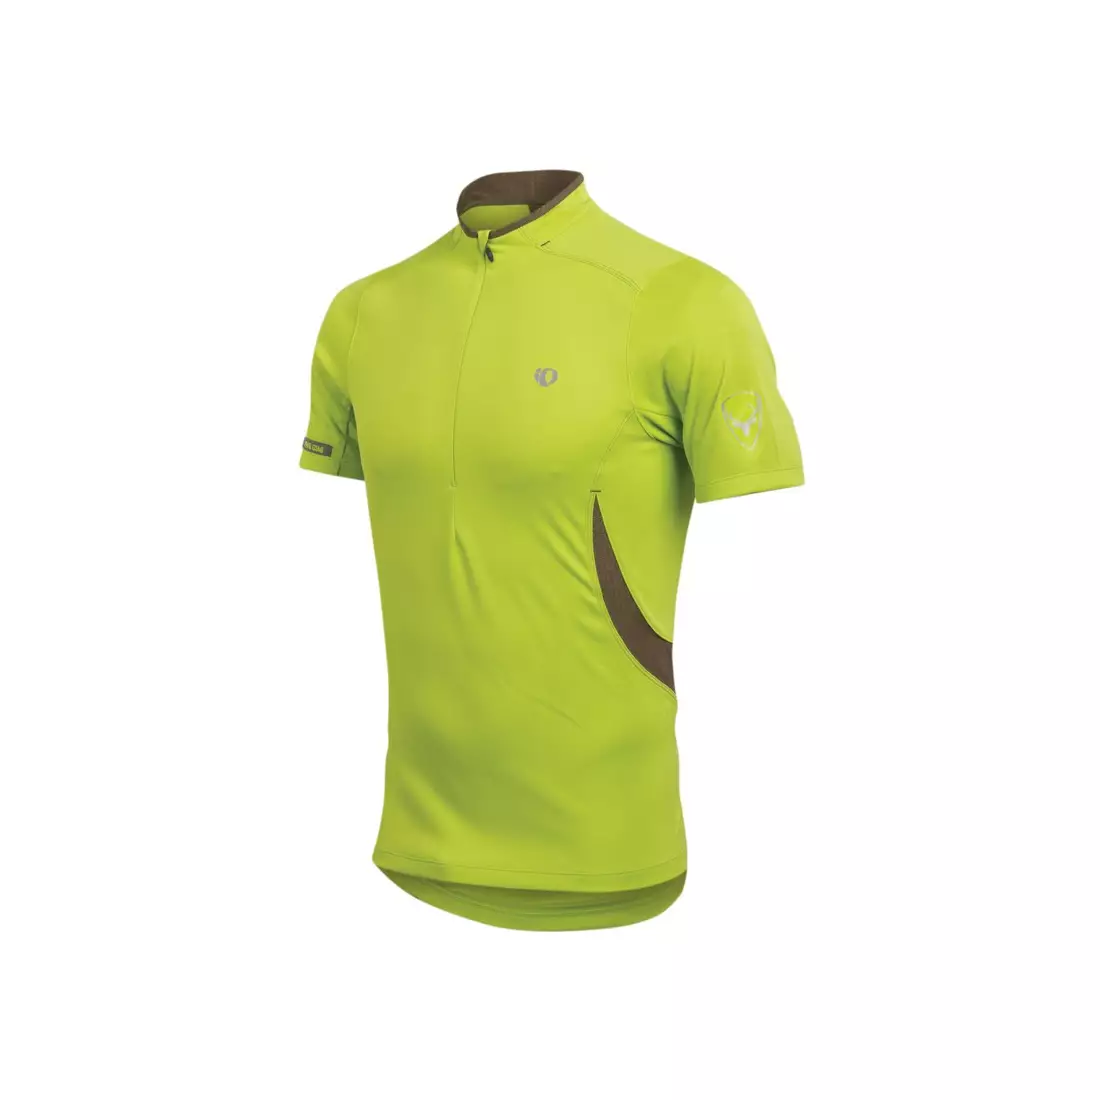 PEARL IZUMI - 211212013 - FOREST - loose cycling jersey